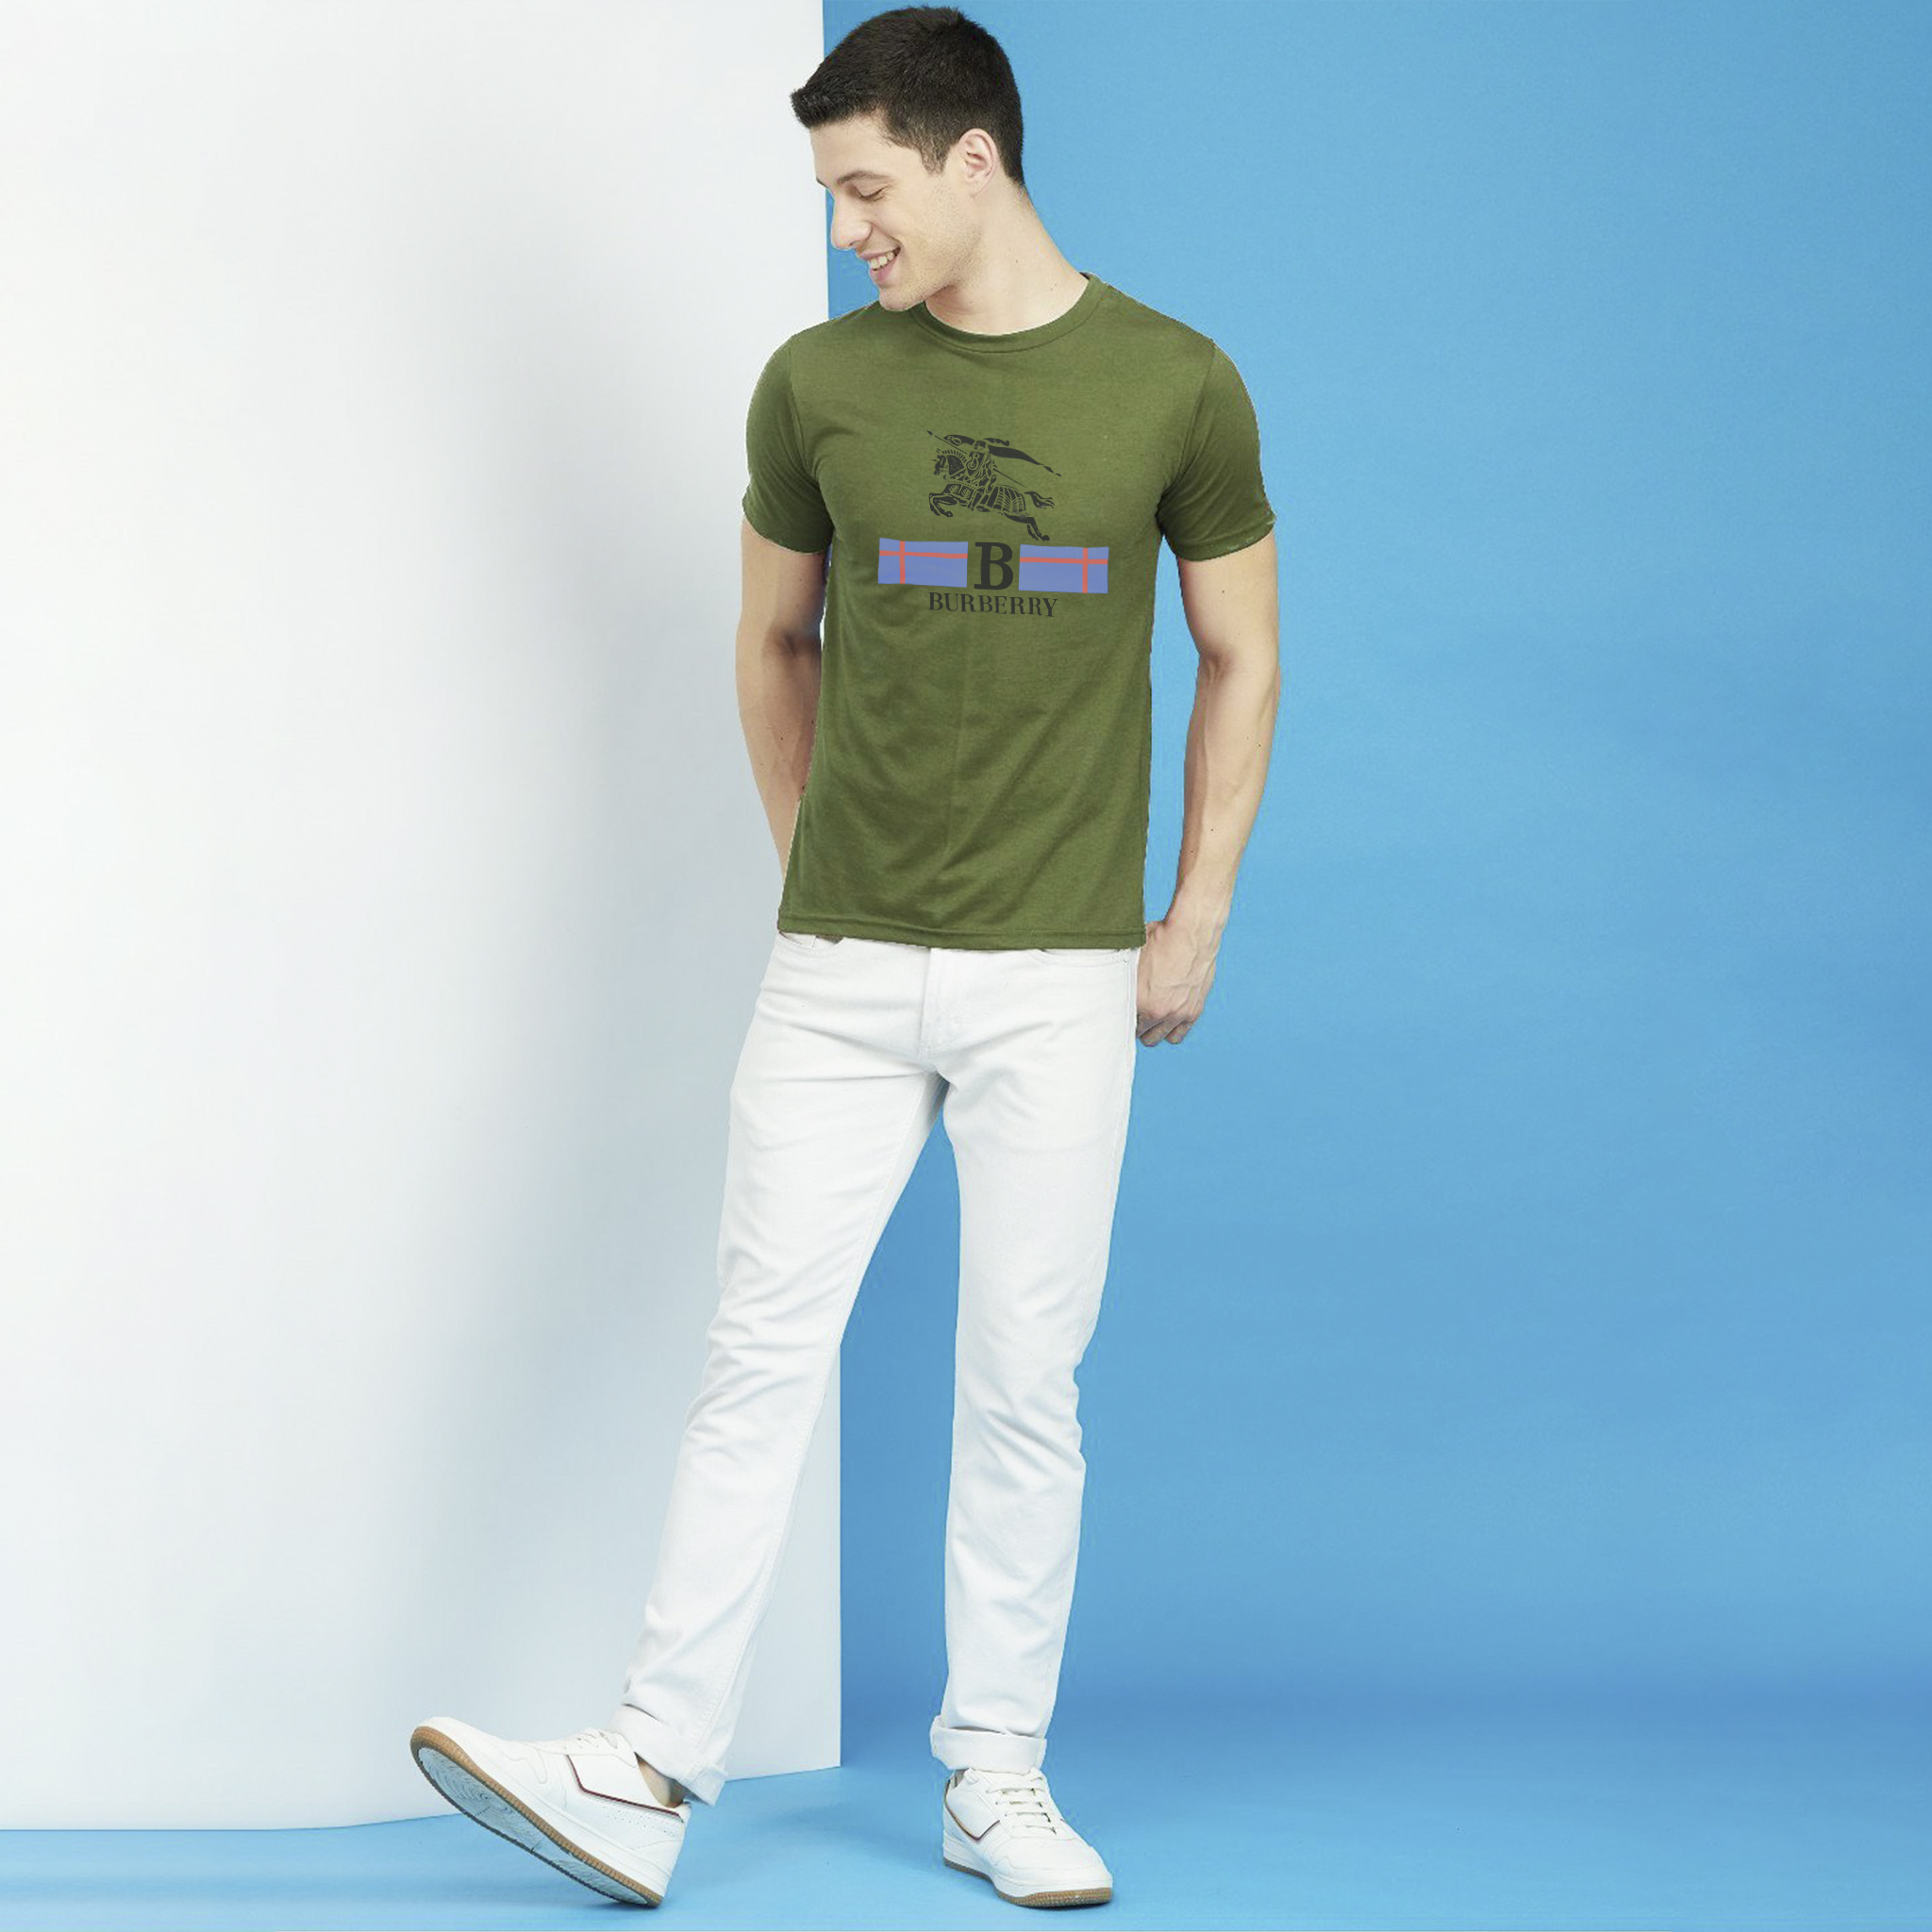 unique ways to style branded t-shirts